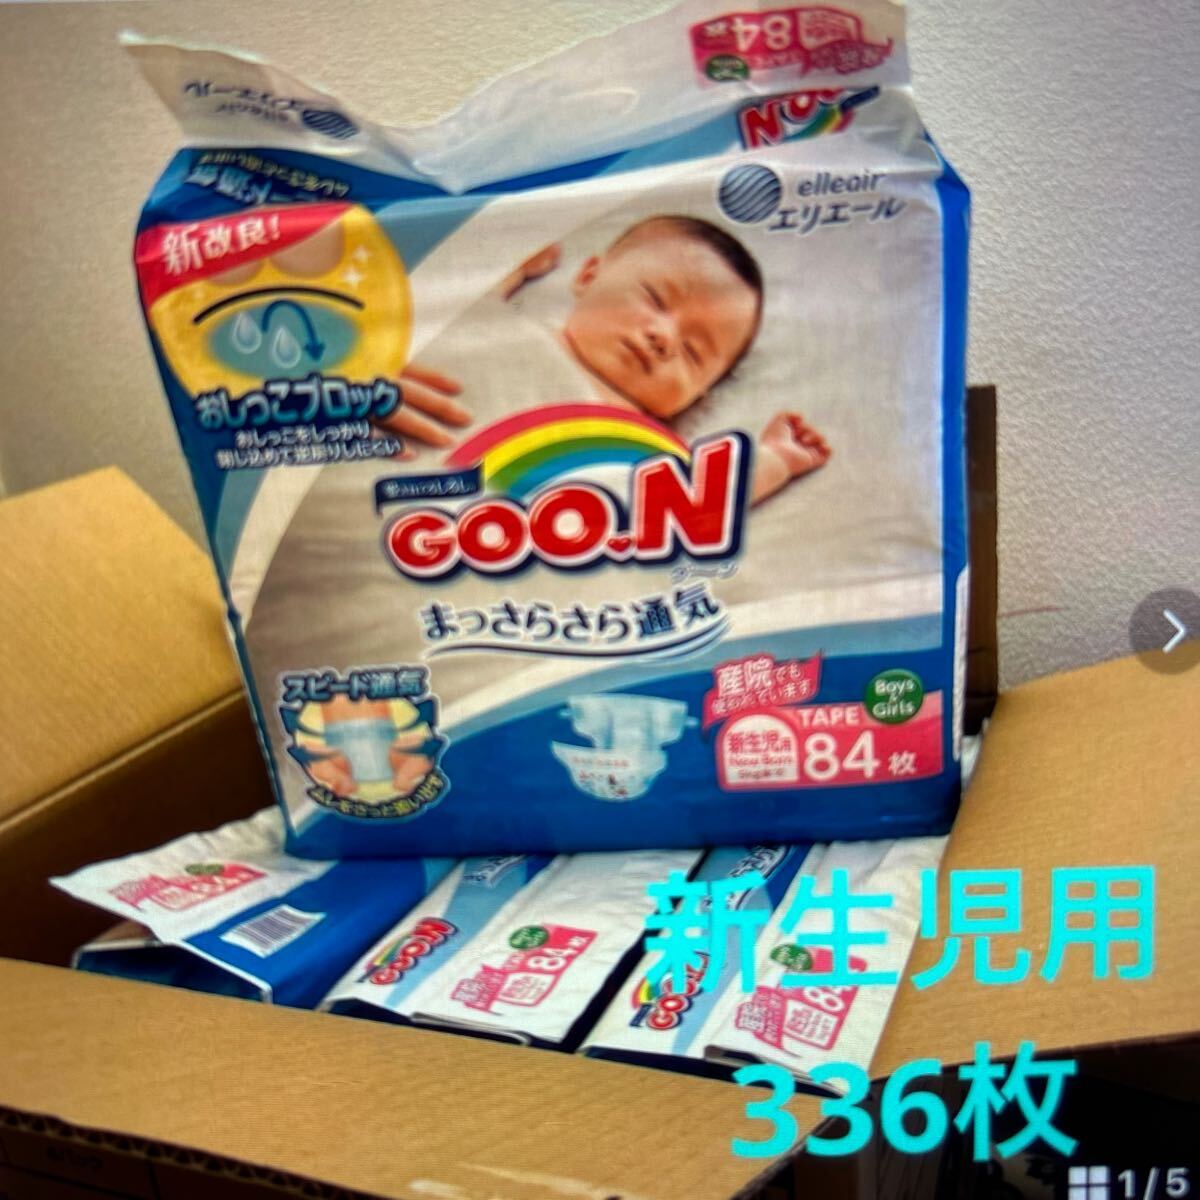  new goods g-n disposable diapers tape newborn baby 336 sheets elie-ru